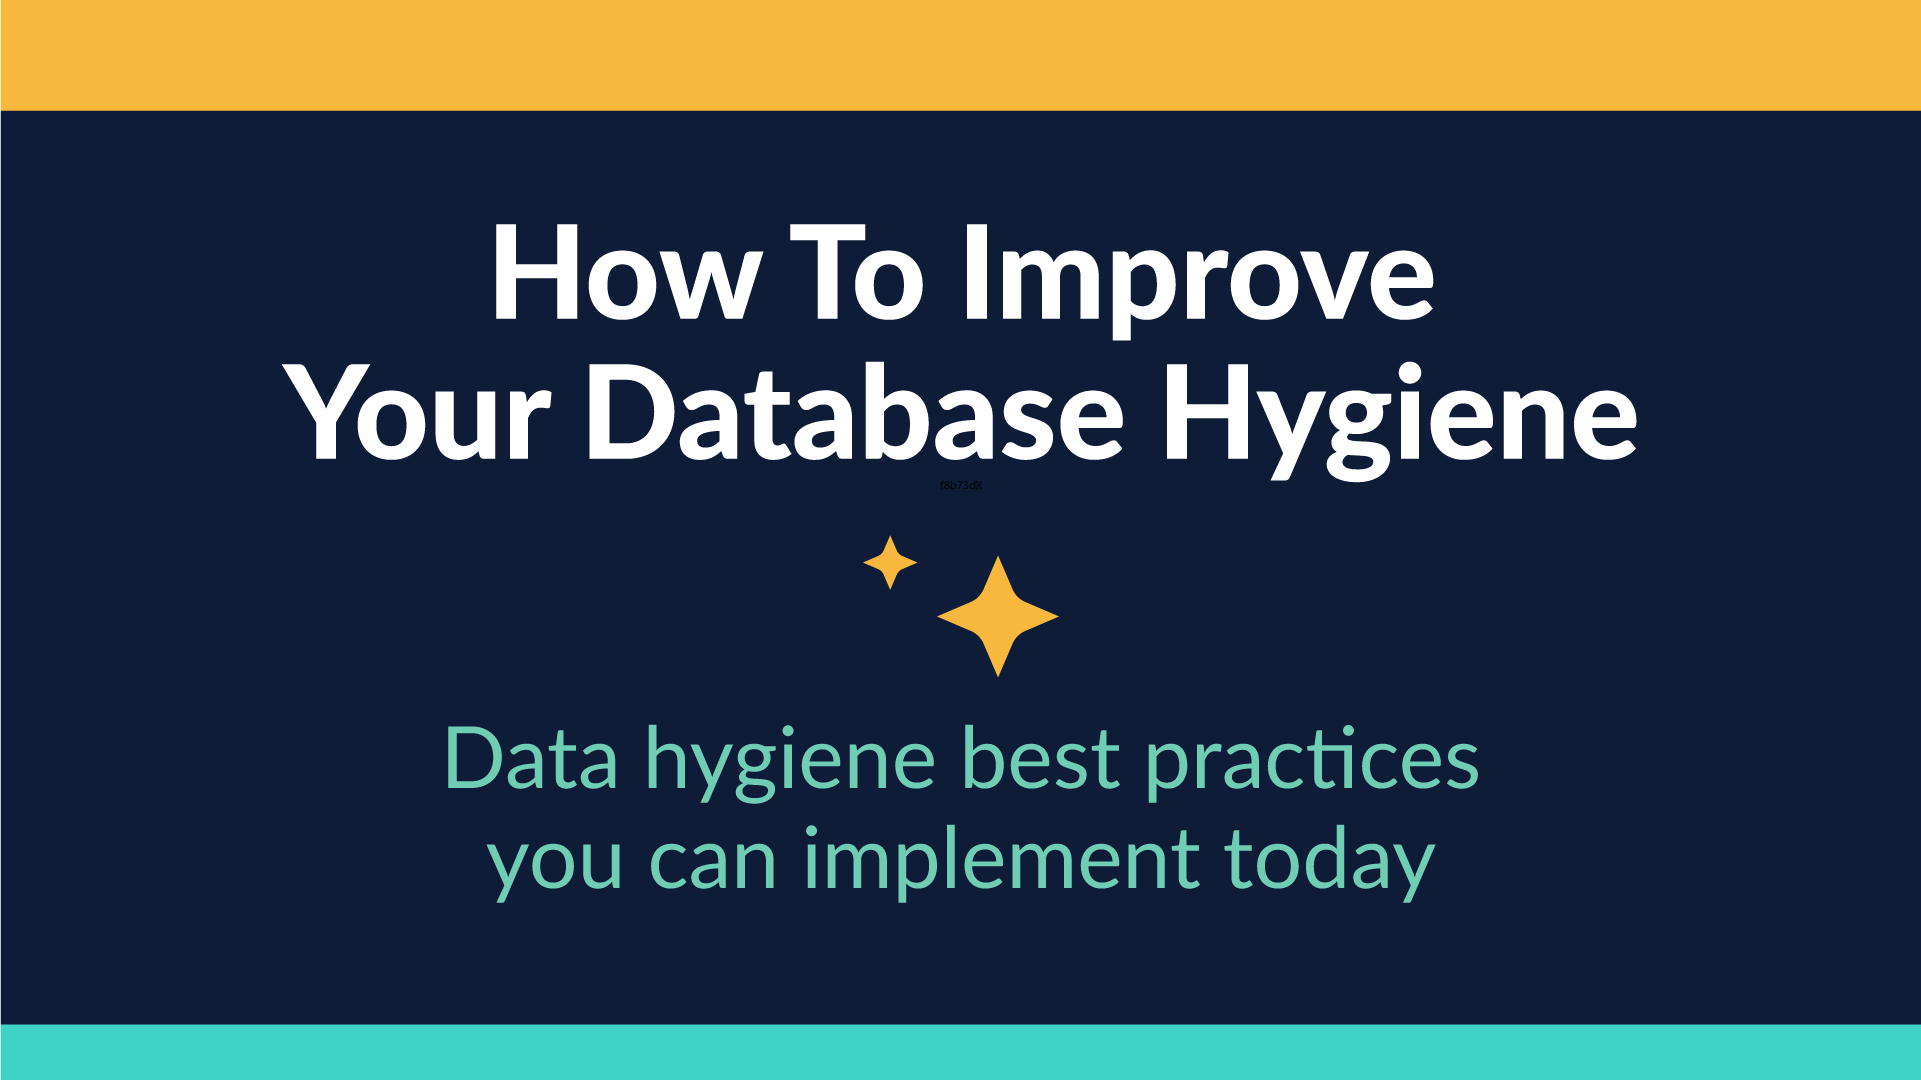 How To Improve Your Database Hygiene